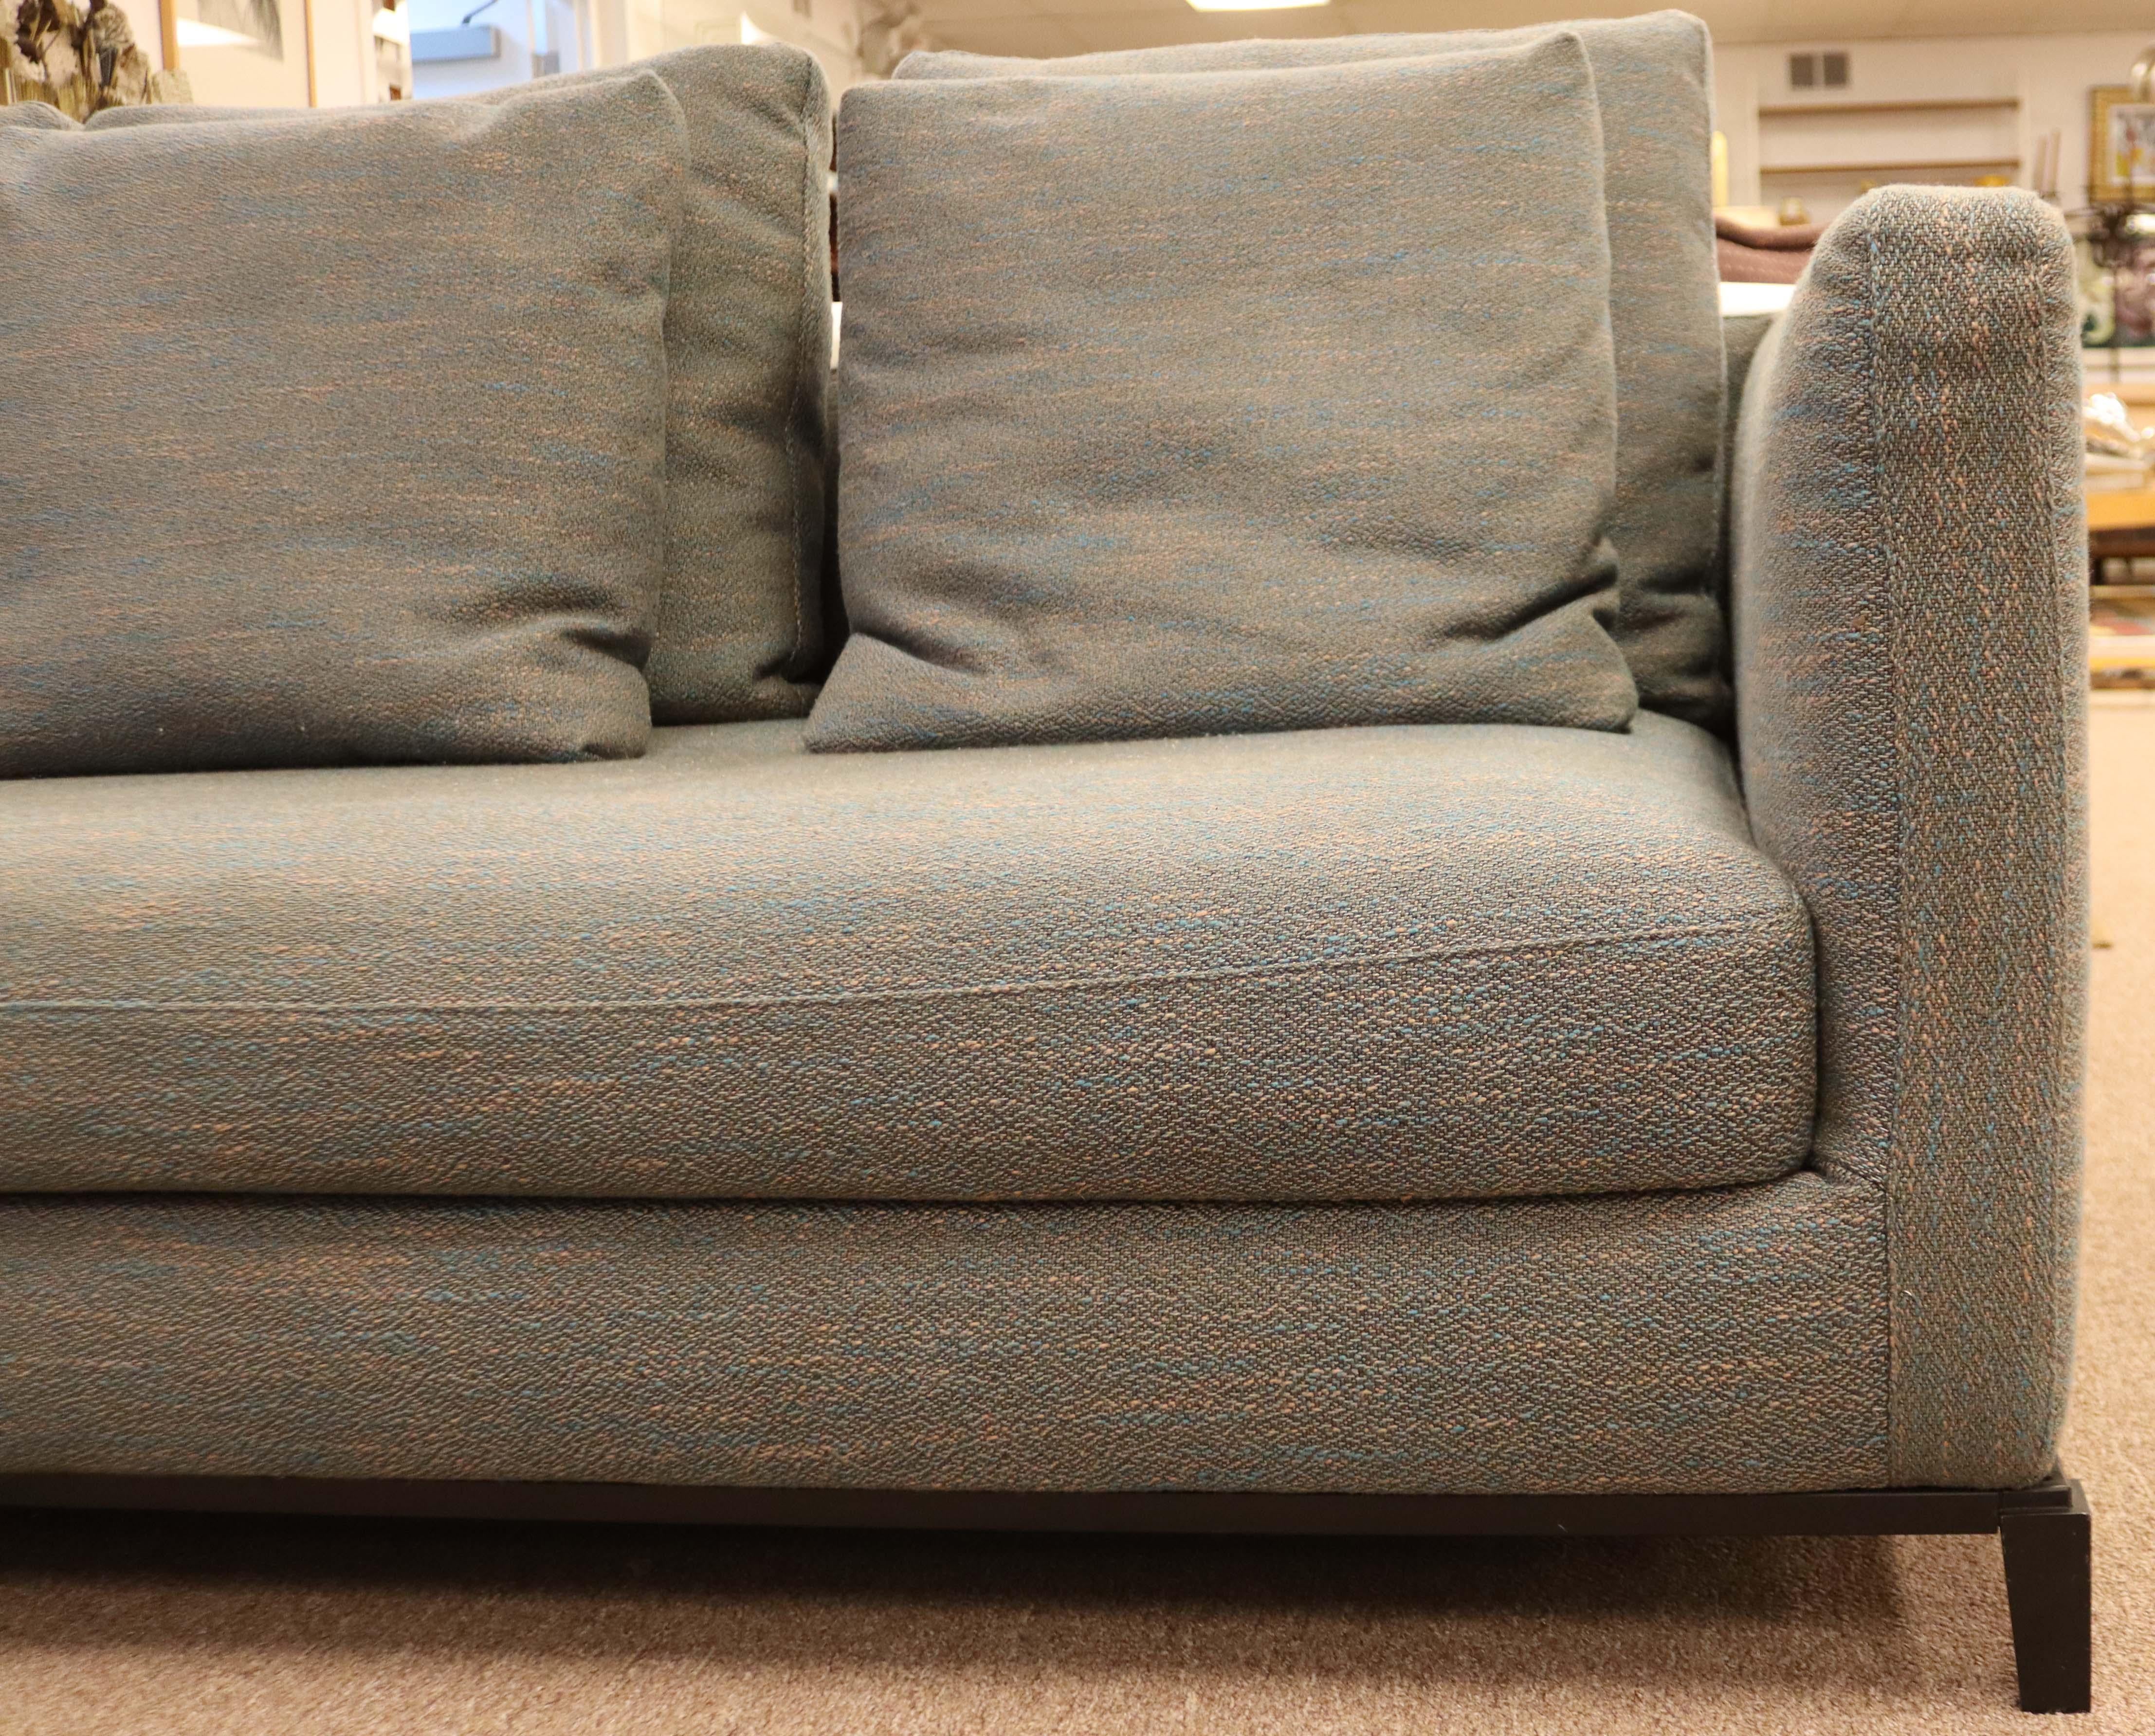 Up for sale is a sophisticated, full size sofa in a blue and grey textured upholstery in very good condition. The exposed steel base is finished in a dark stain and adds a clean line detail to the piece. Also included are six removable back cushions